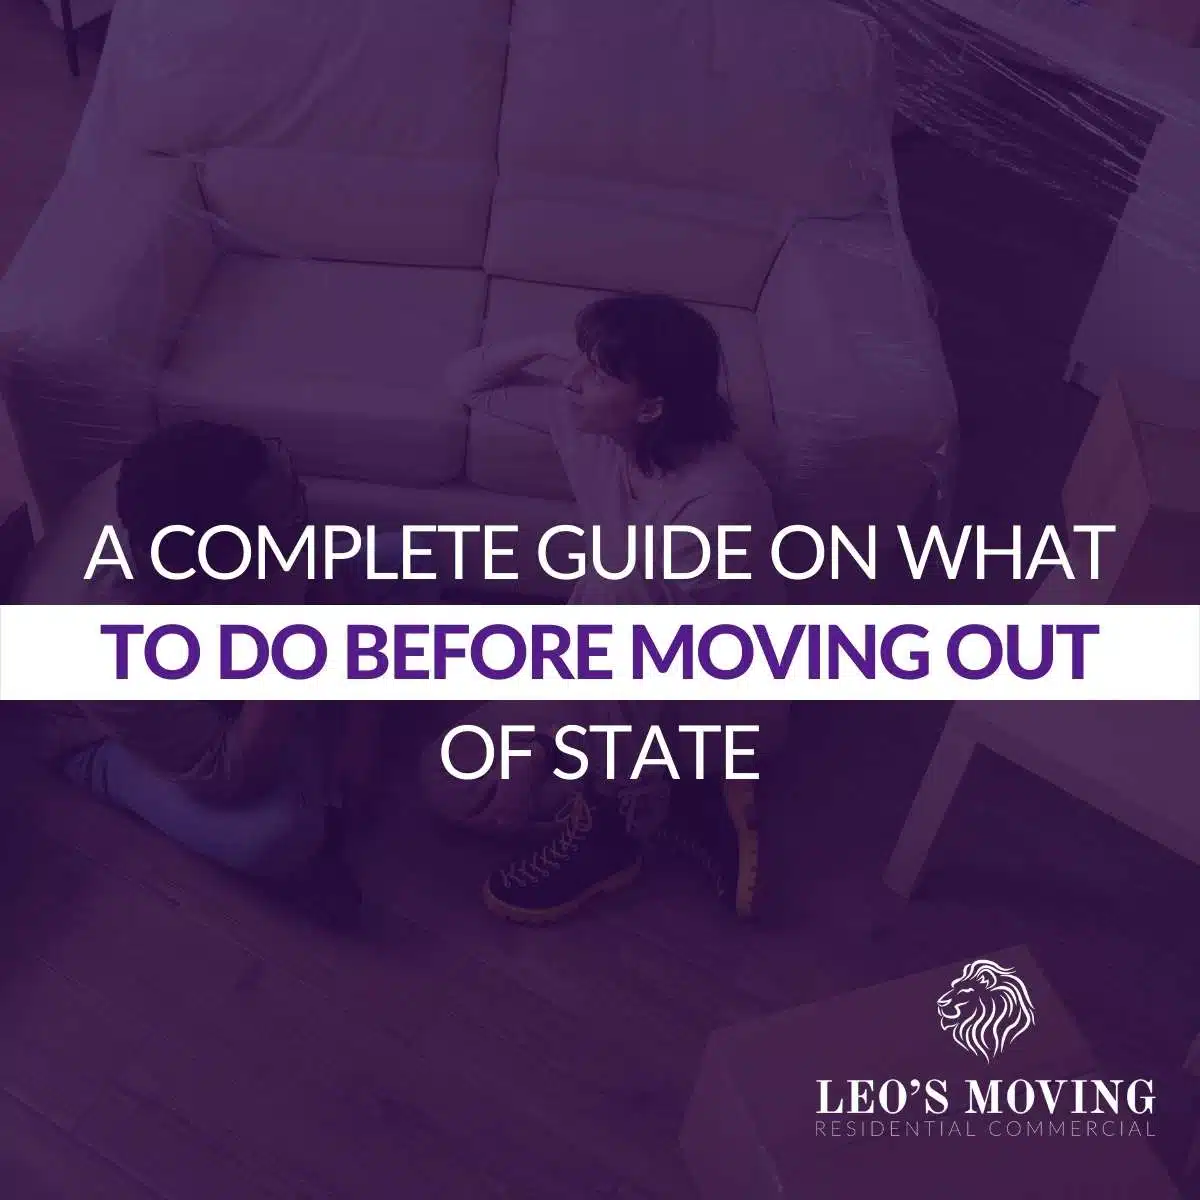 A Complete Guide On What To Do Before Moving Out Of State